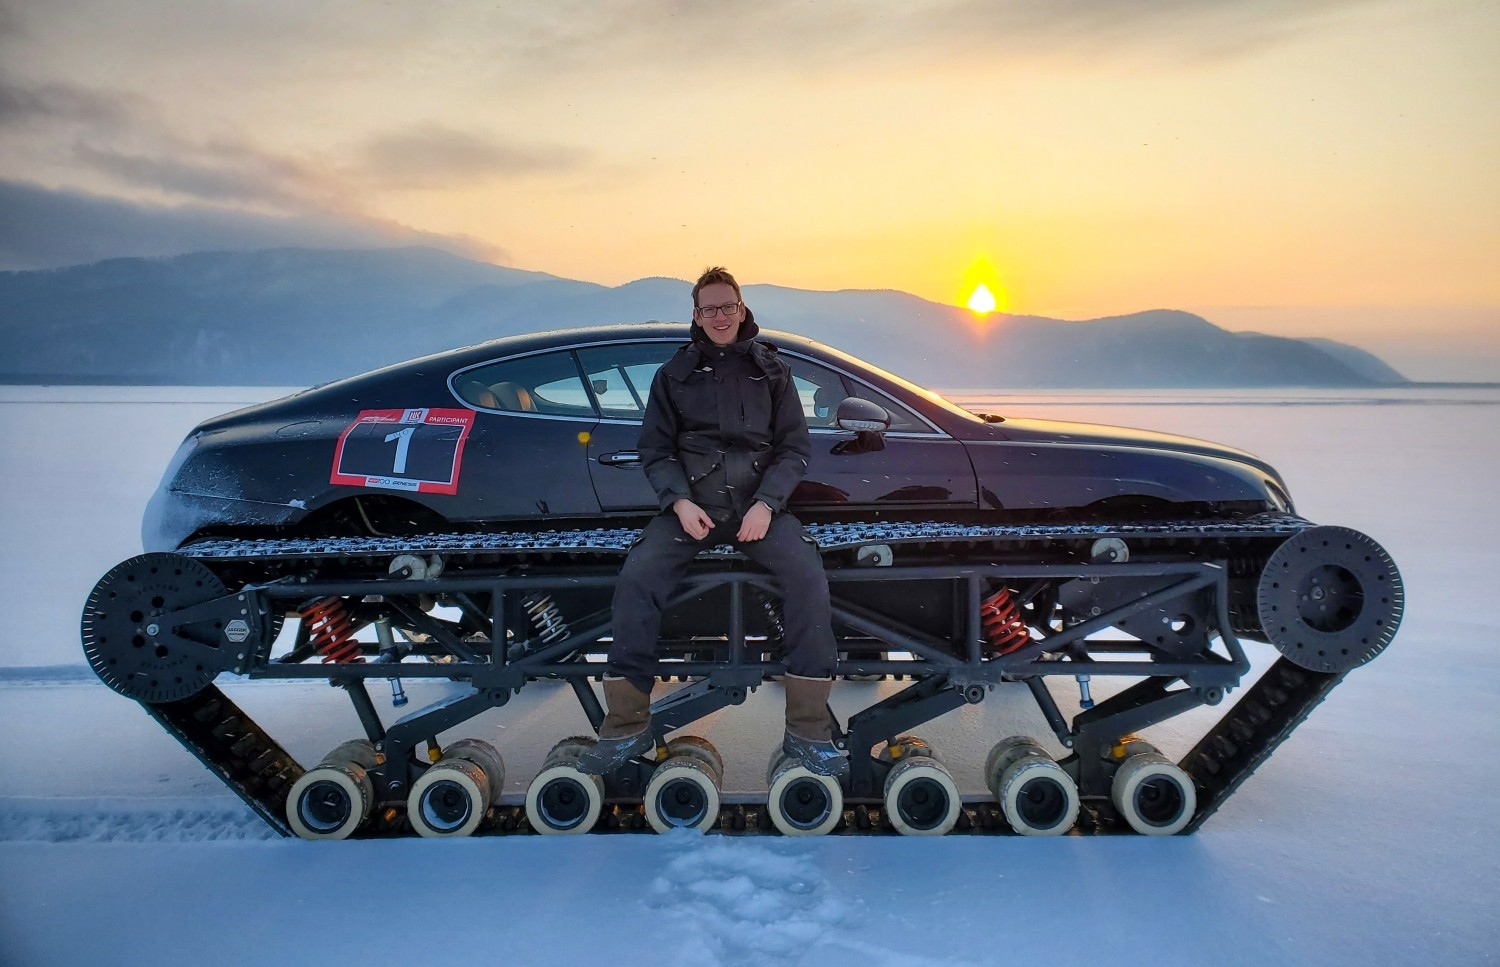 https://s1.cdn.autoevolution.com/images/news/gallery/the-bentley-converted-into-tank-sets-new-speed-record-in-the-baikal-mile-2020_1.jpg